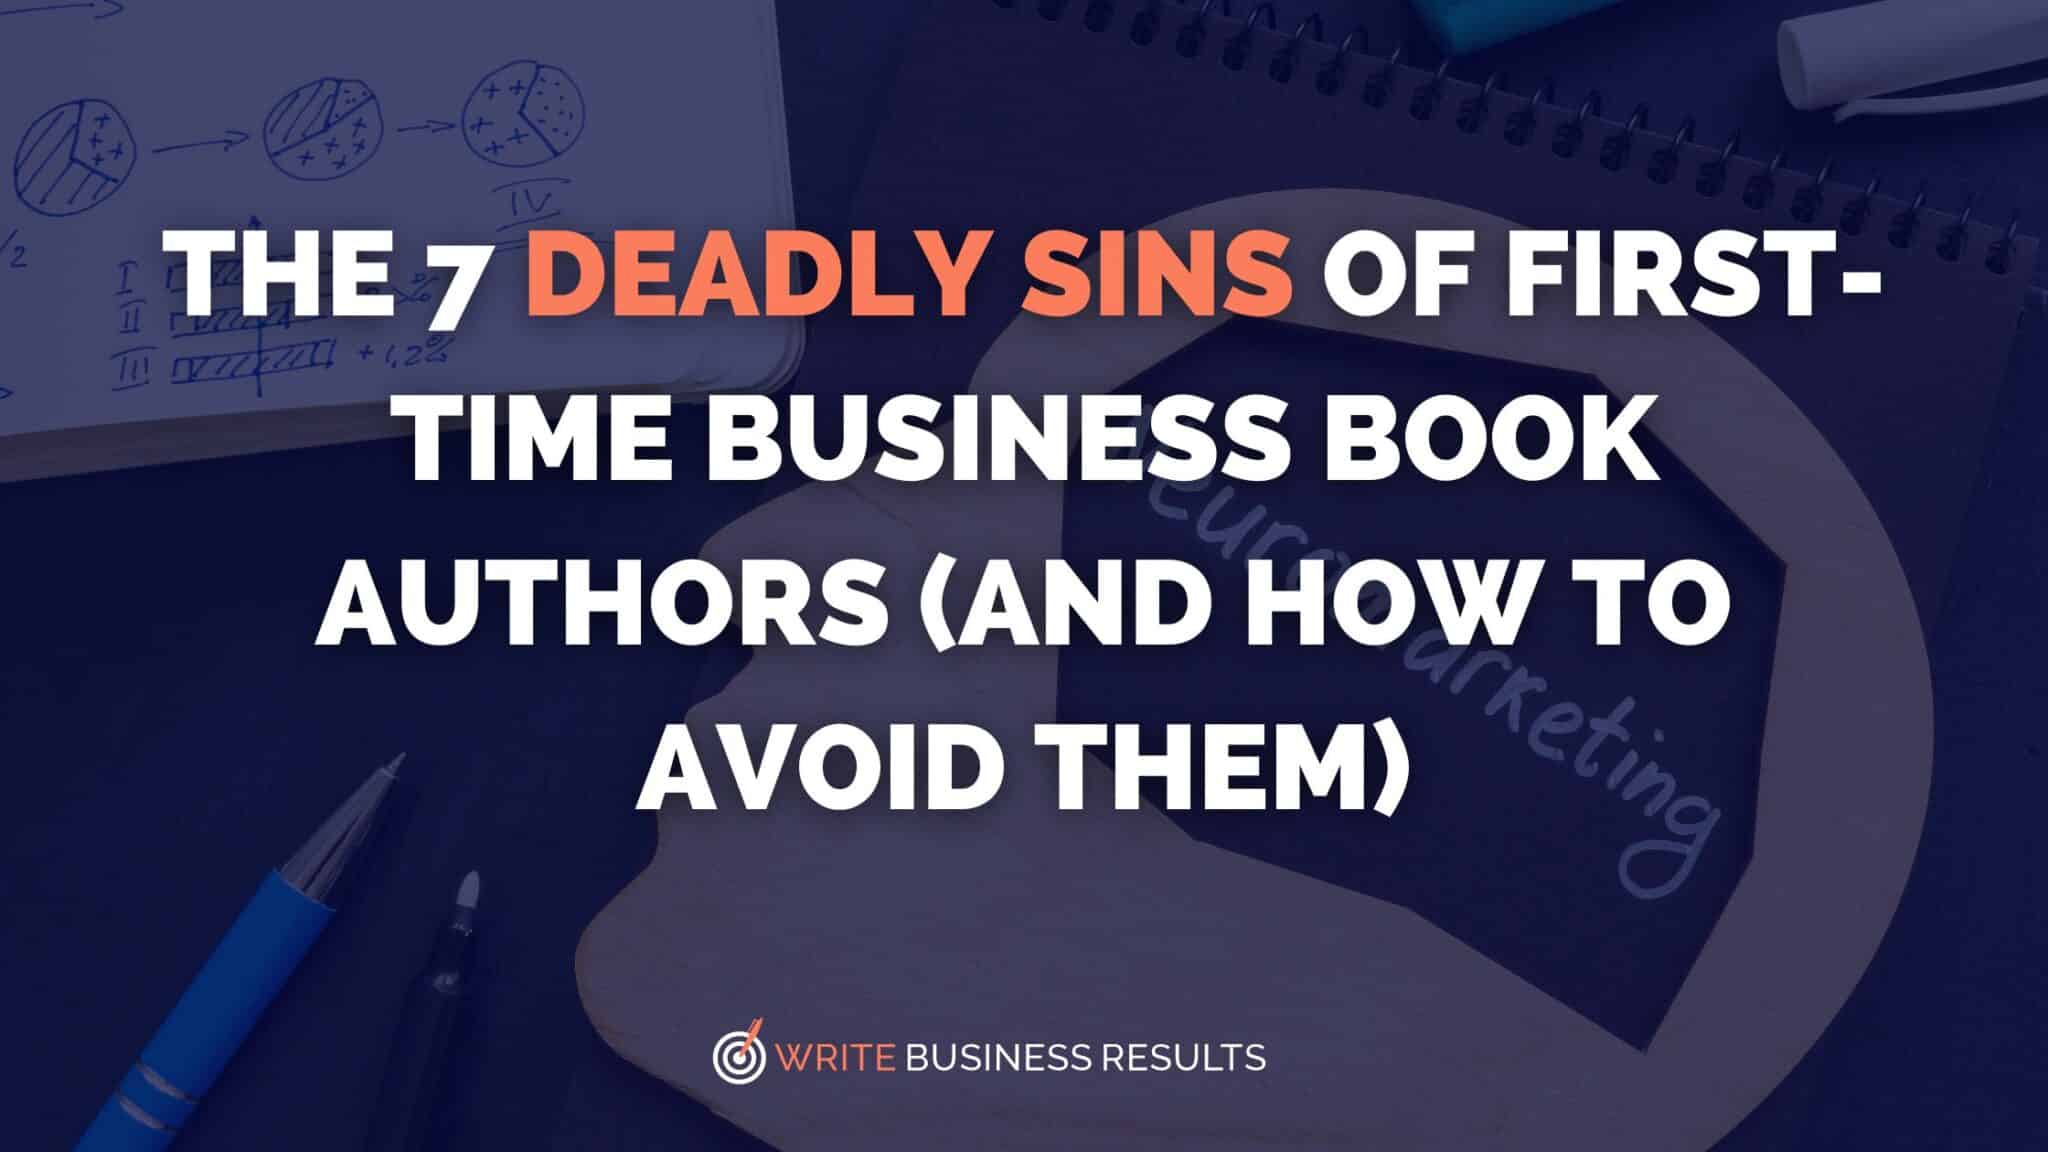 The 7 Deadly Sins of First-Time Business Book Authors (And How to Avoid Them)